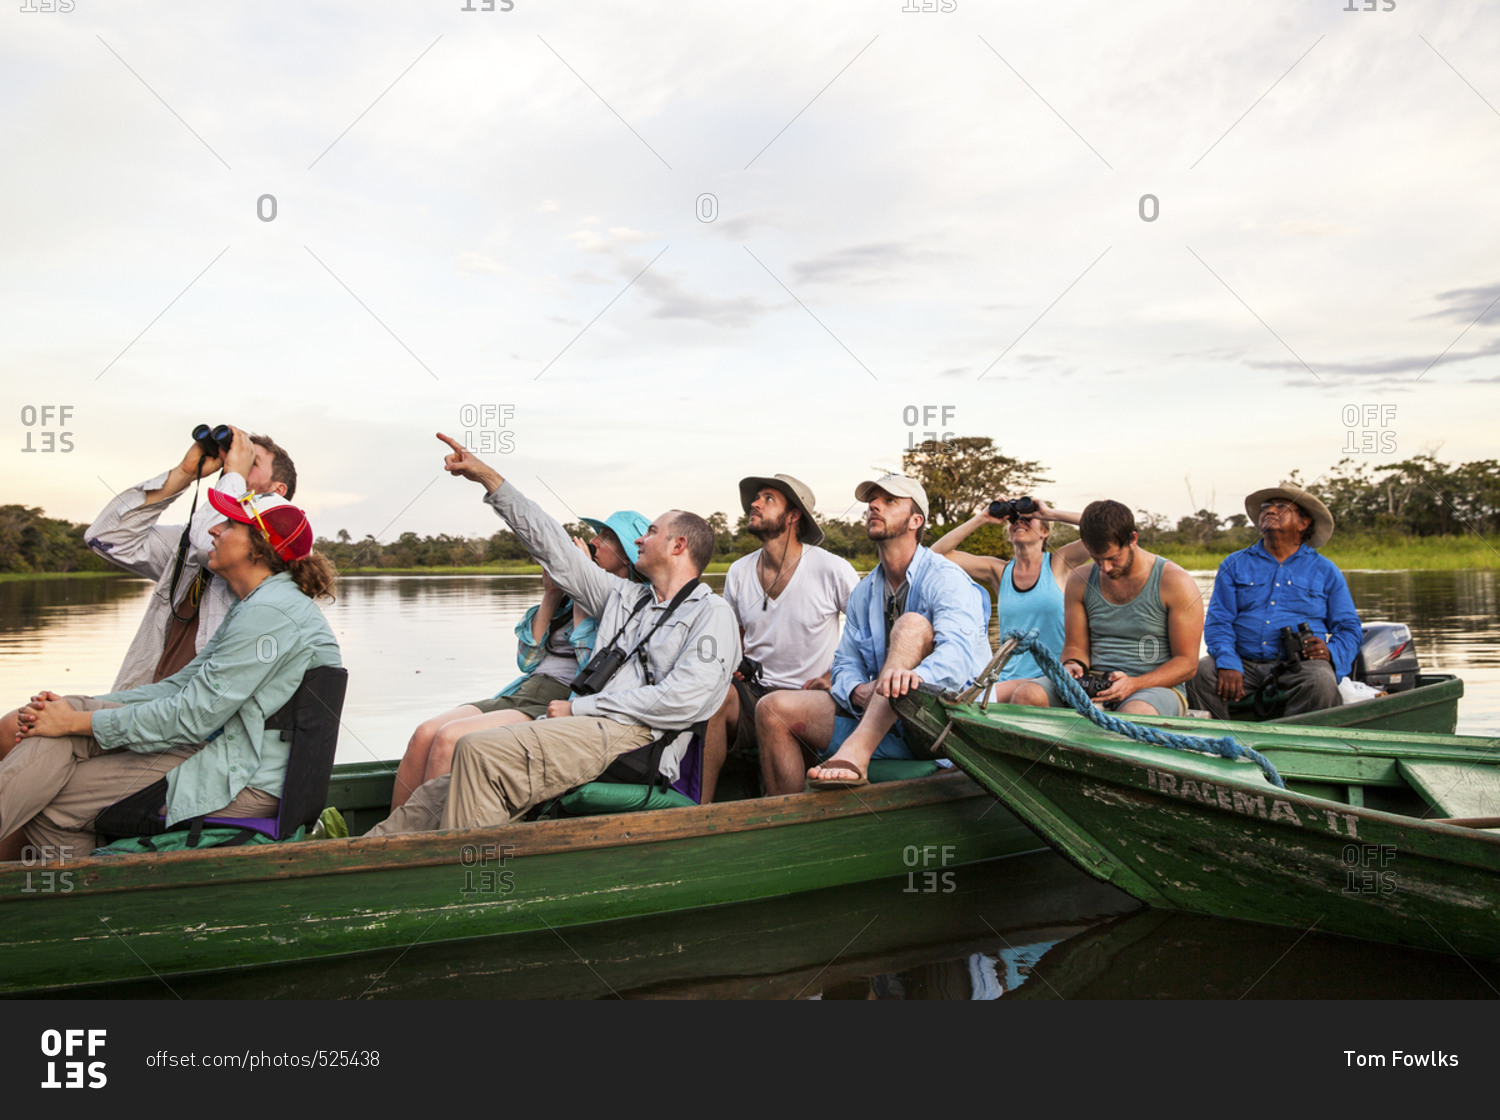 Amazonas, Brazil - February 25, 2015: Group of tourists spotting a bird in the jungle canopy from their canoe on the Amazon River